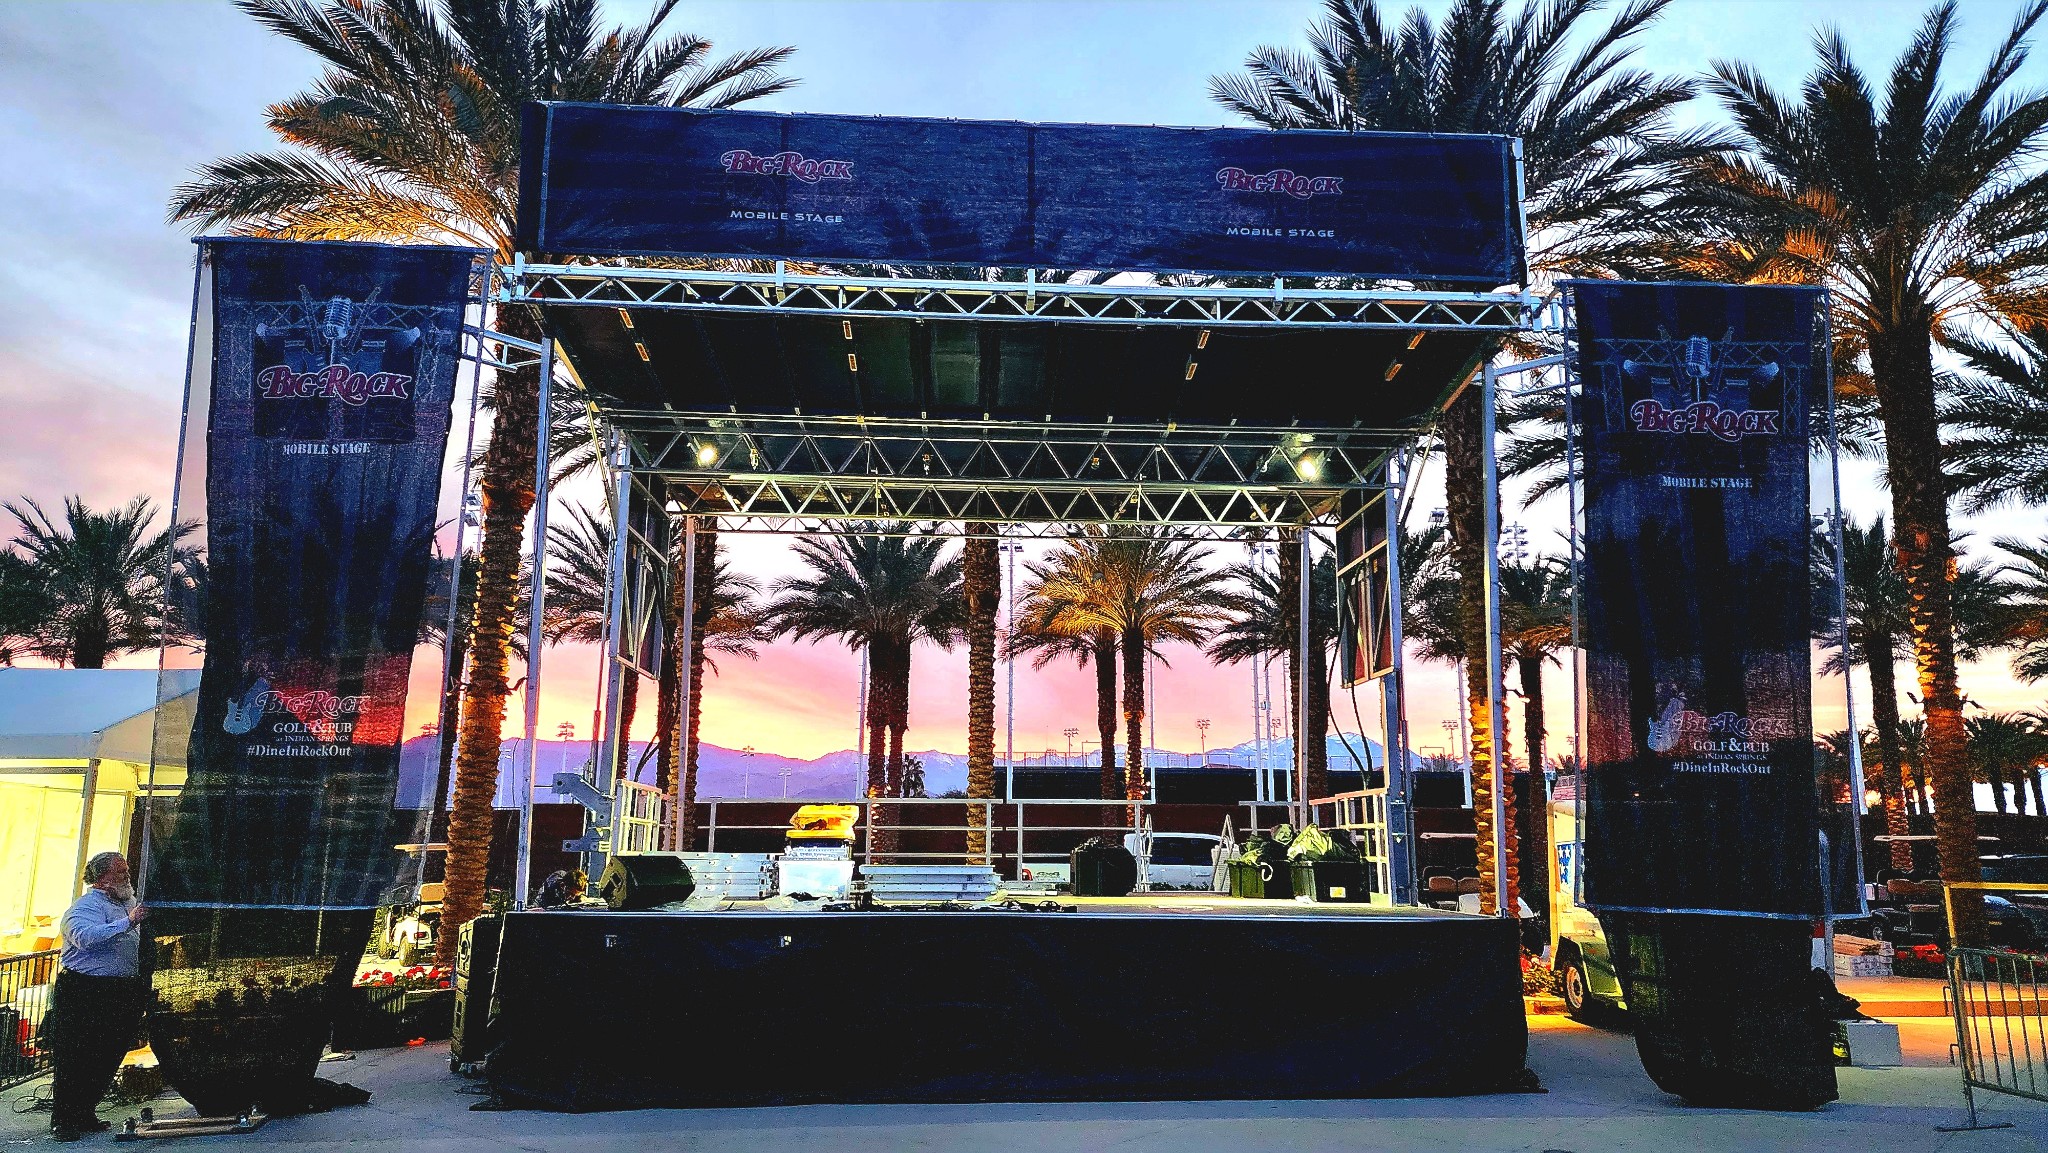 Mobile Stage at Sunset